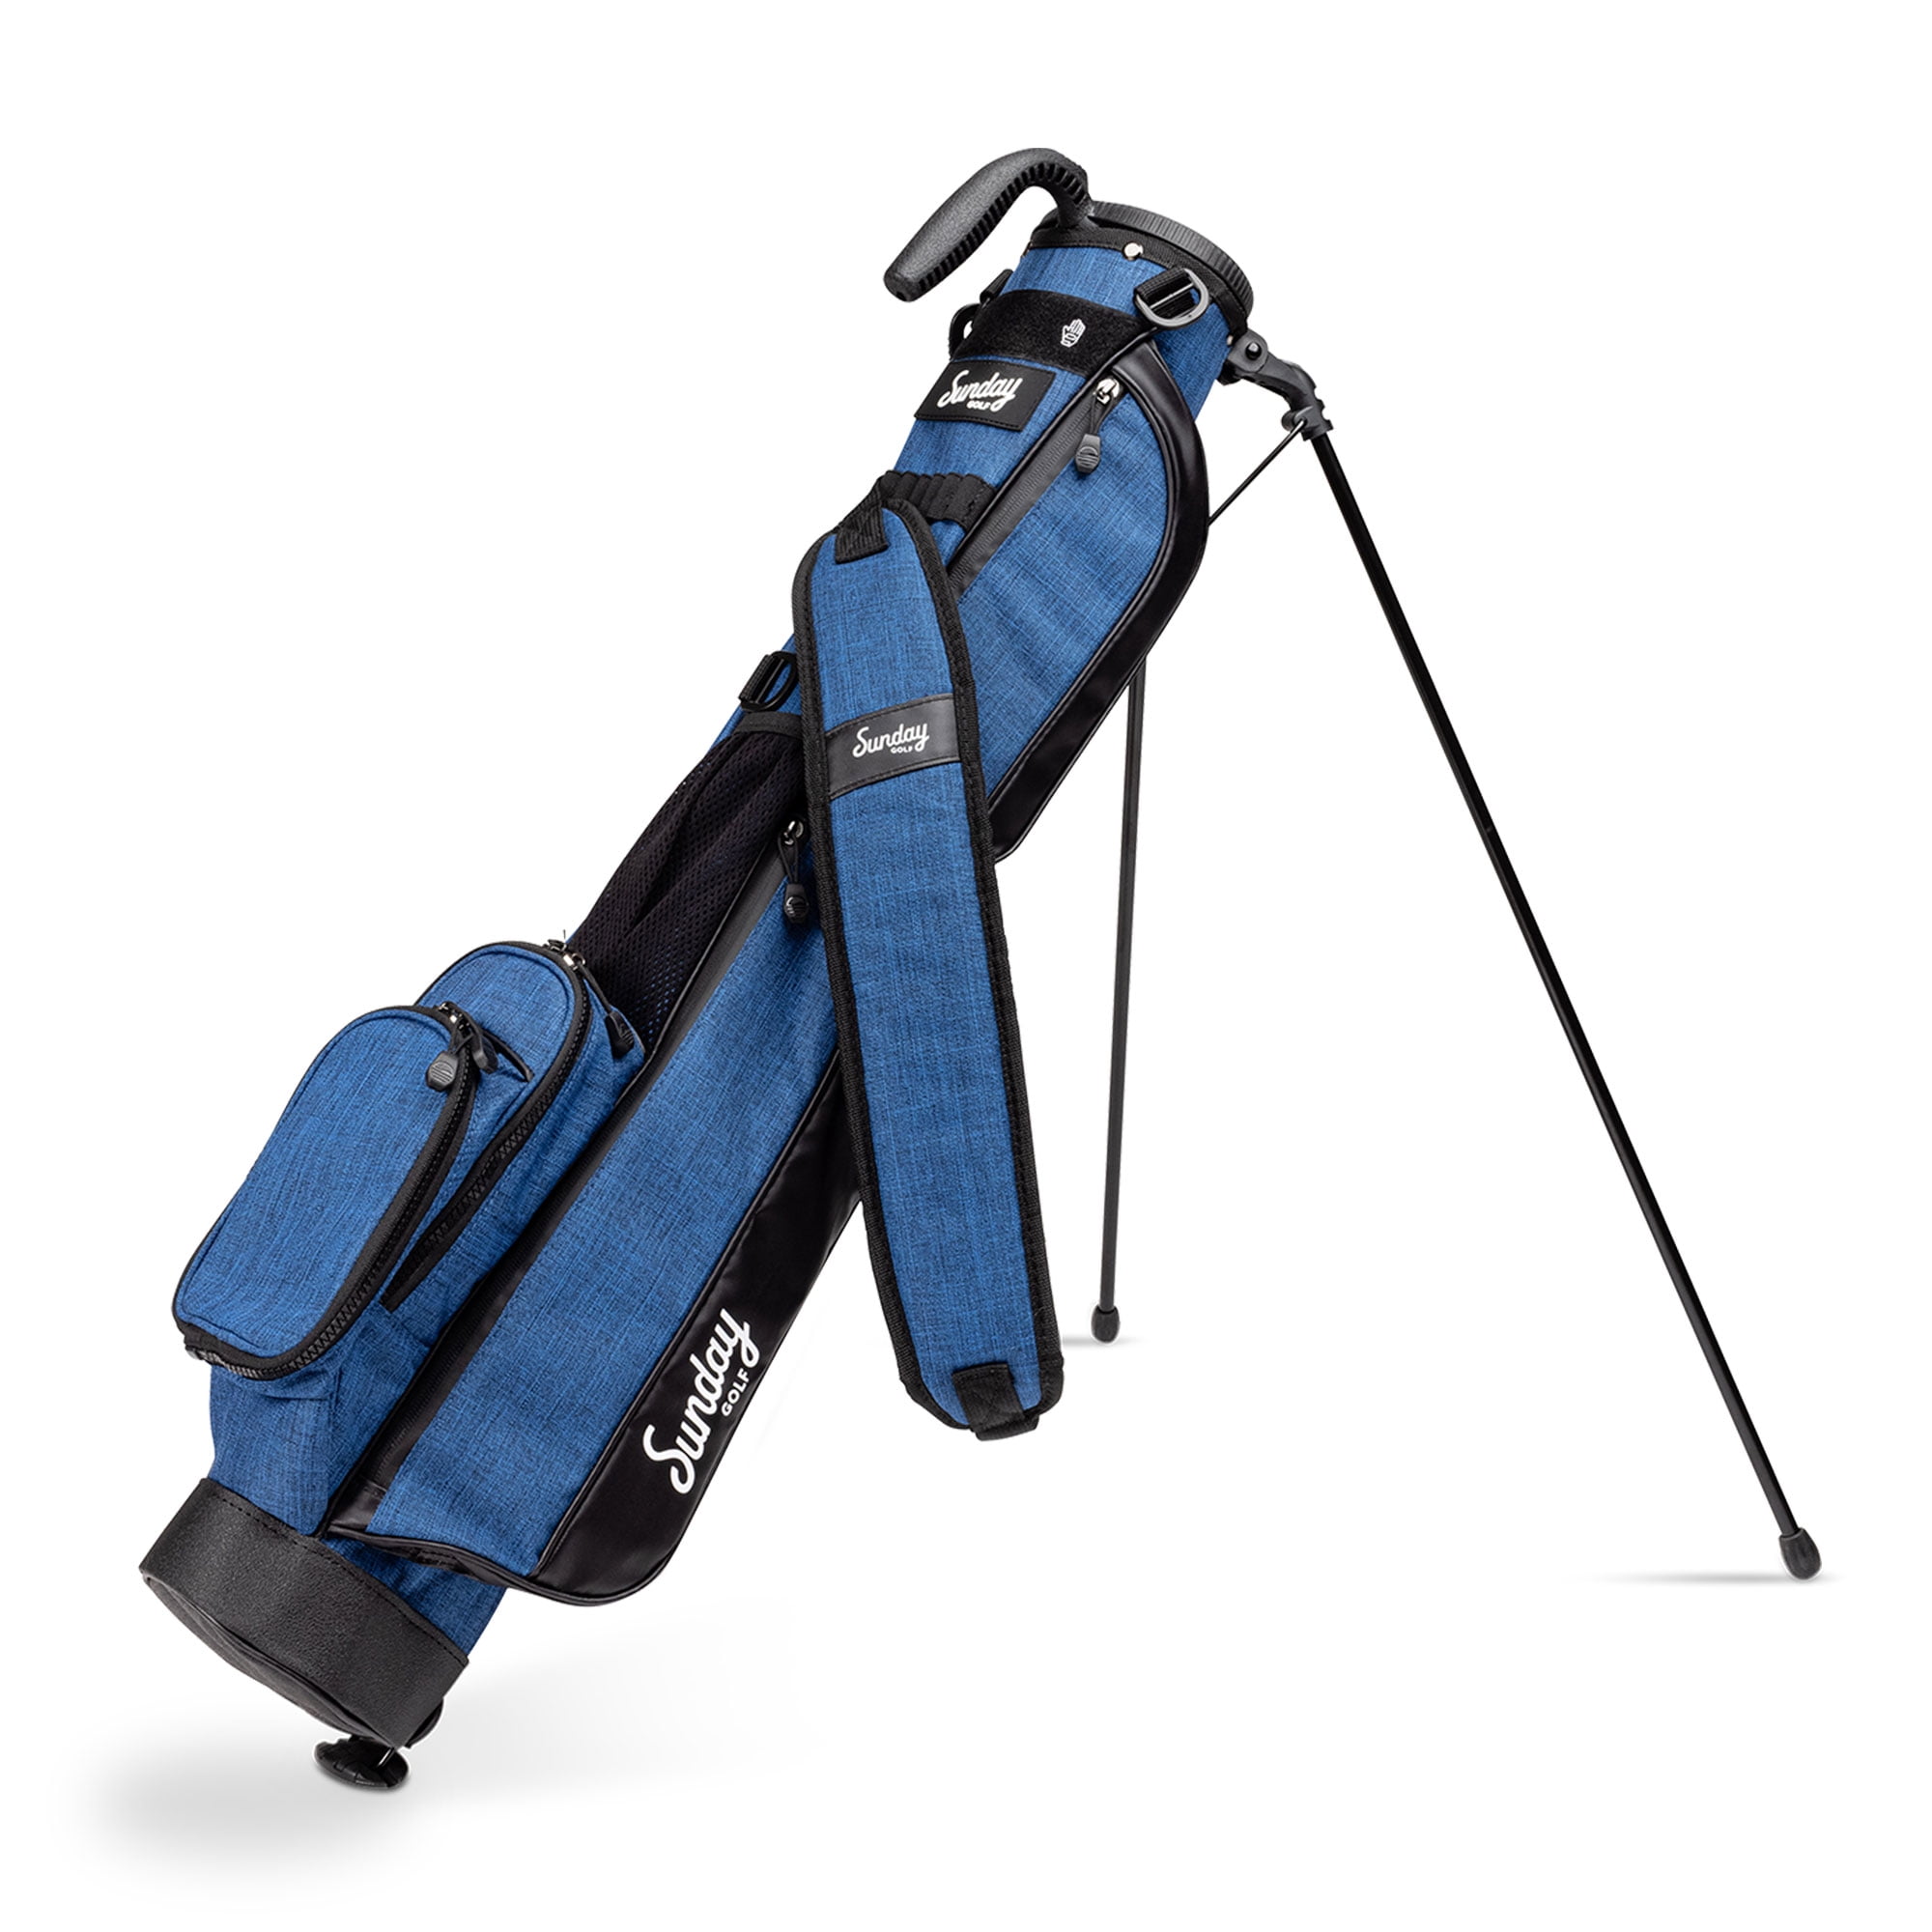 SUNDAY GOLF OFFICIALLY LAUNCHES EL CAMINO STAND BAG TO LINEUP OF LIGHTWEIGHT  GOLF BAGS  The Golf Wire